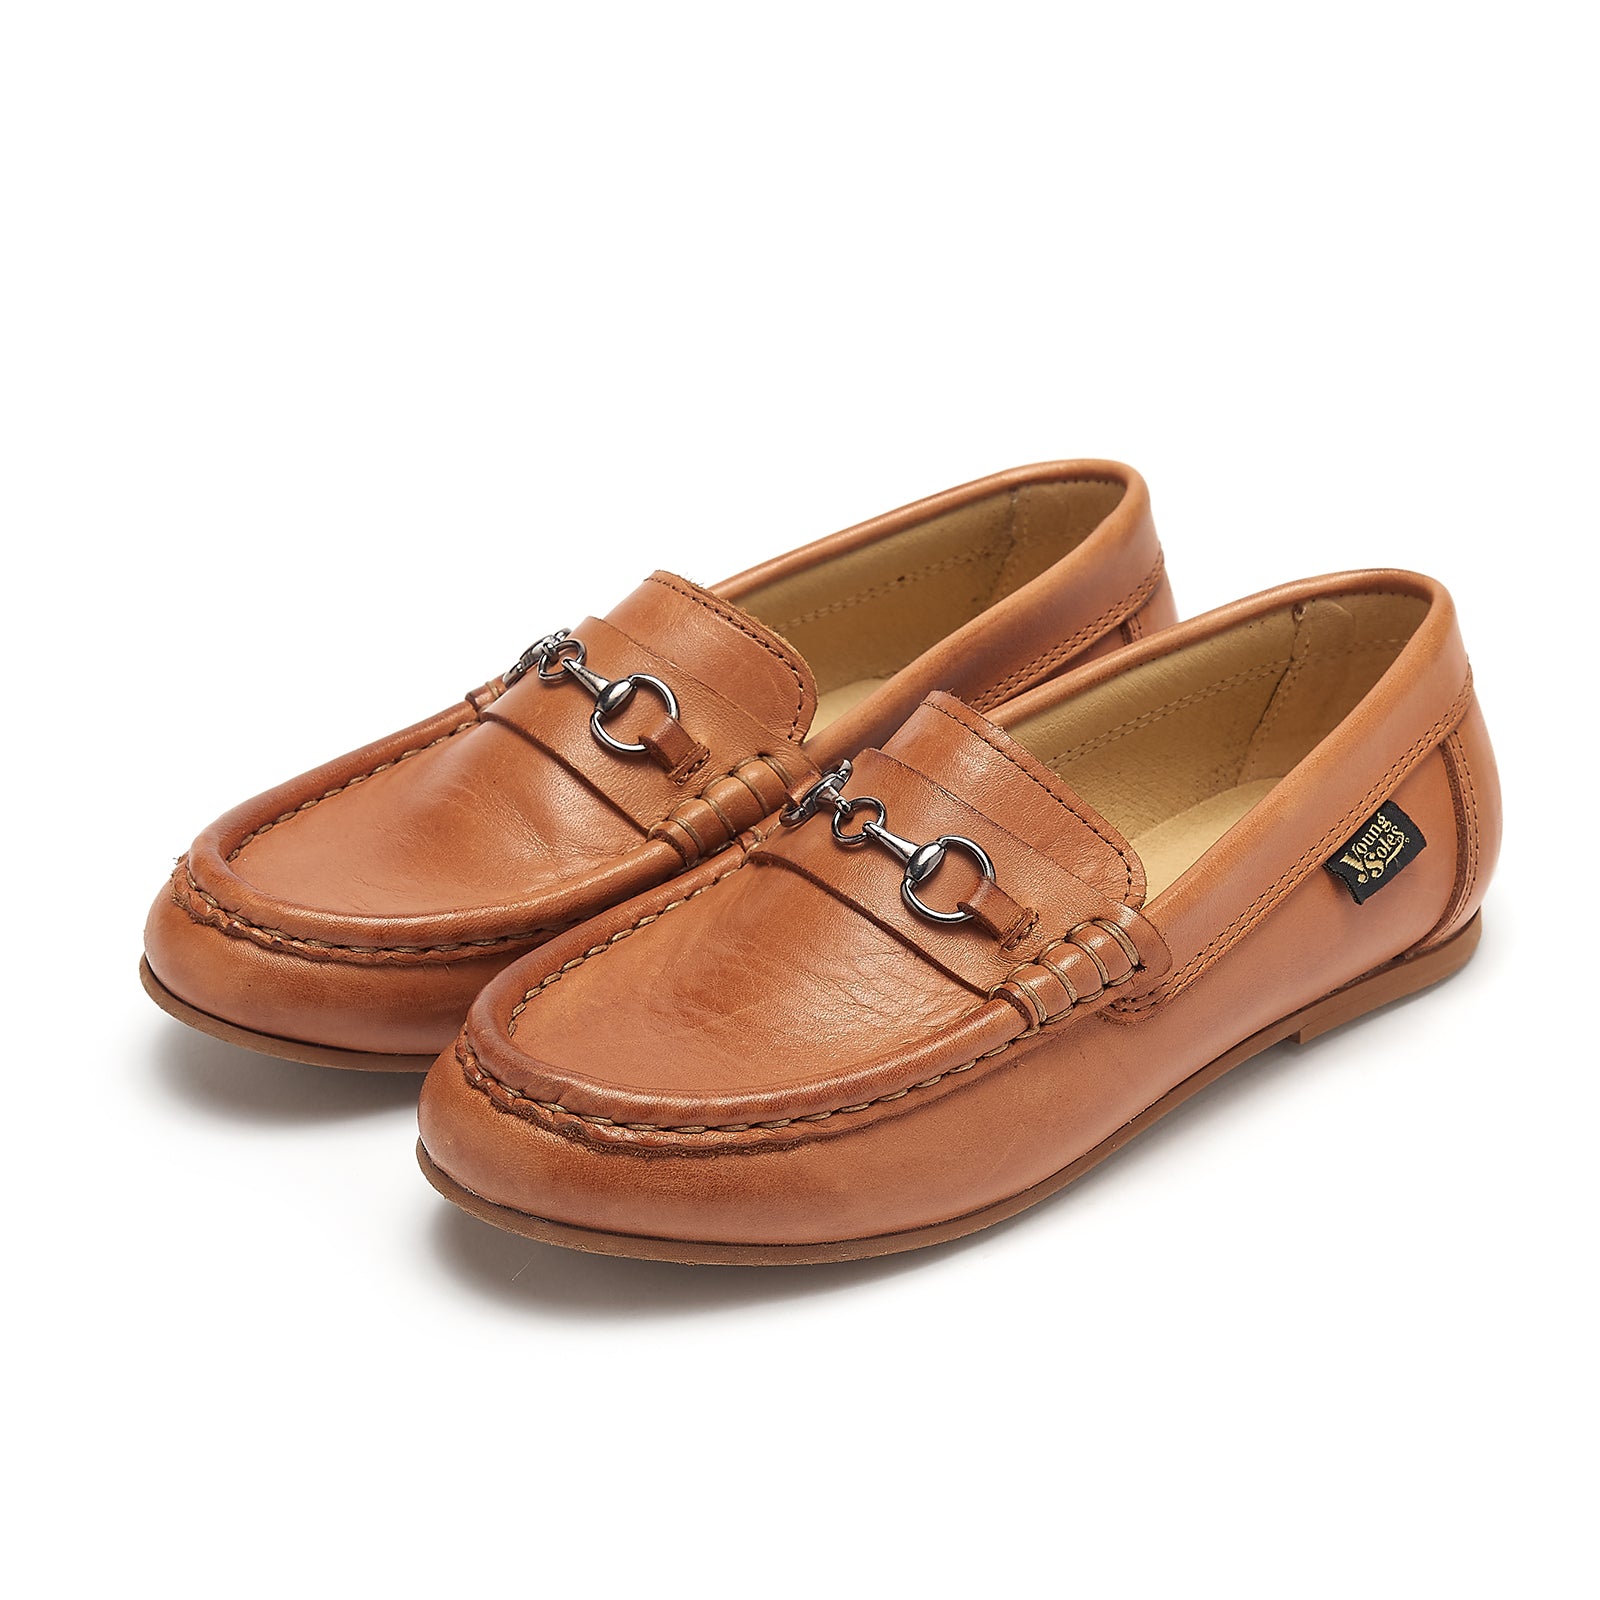 Young Soles Ricki Burnished Tan Loafer Leather Shoes